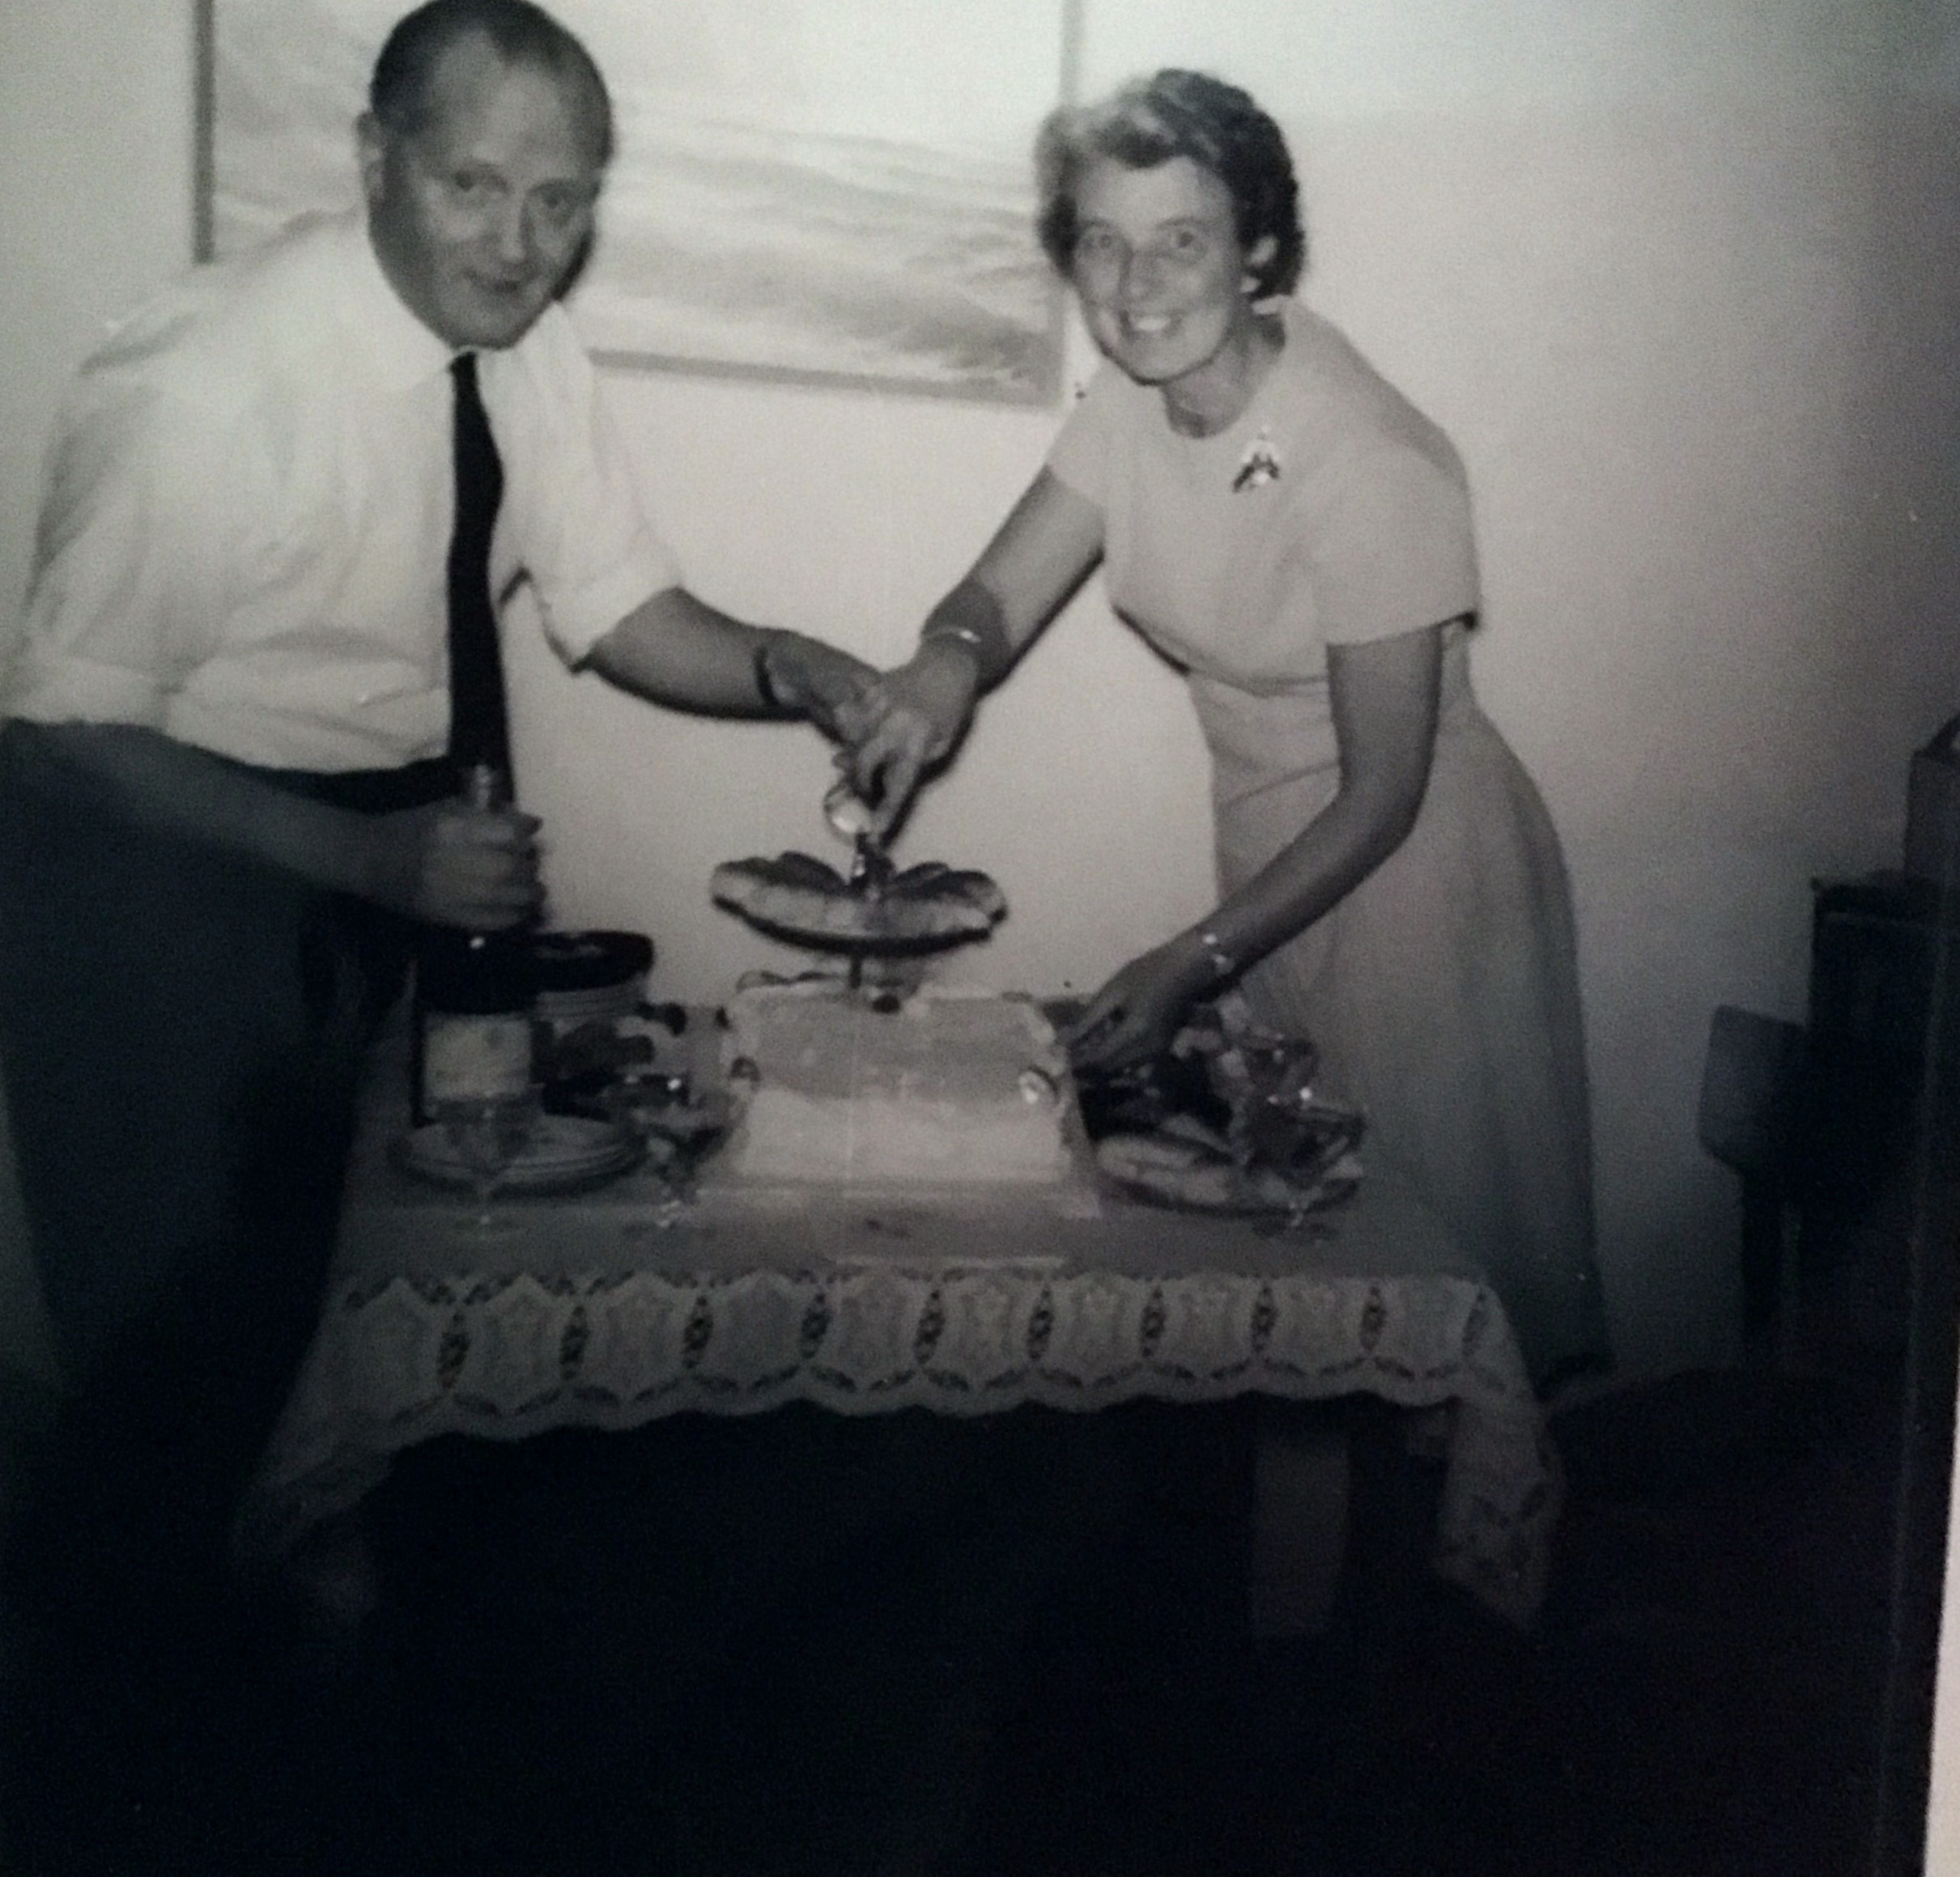 Mum and dad’s Silver Wedding Anniversary October 1967